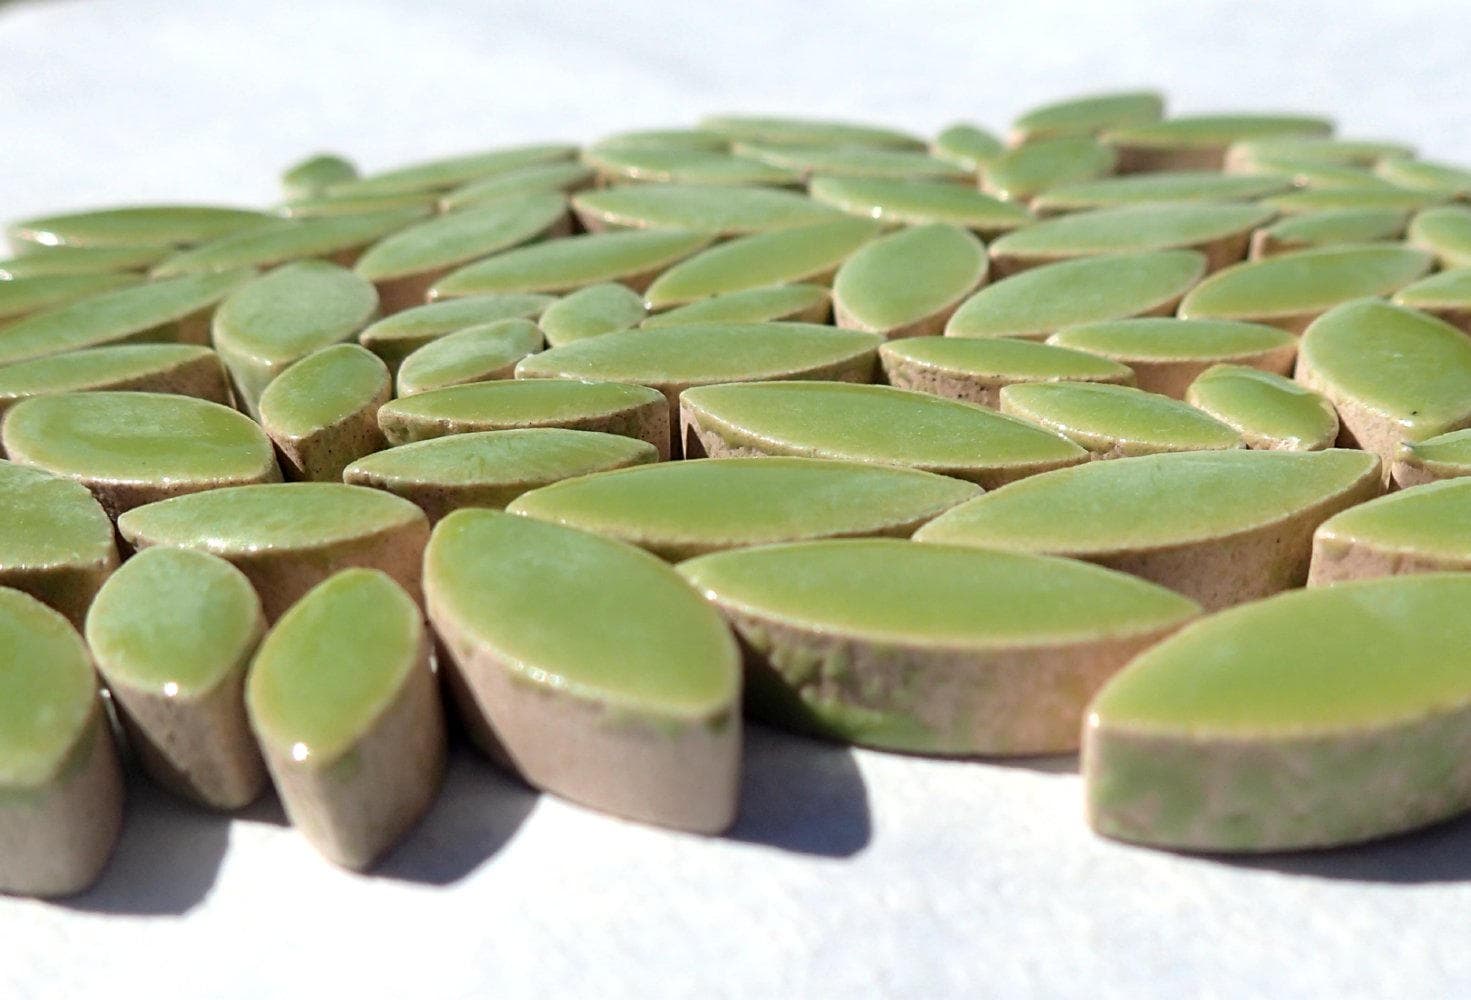 Kiwi Green Petals Mosaic Tiles - 50g Ceramic Leaves in Mix of 2 Sizes 1/2" and 3/4"